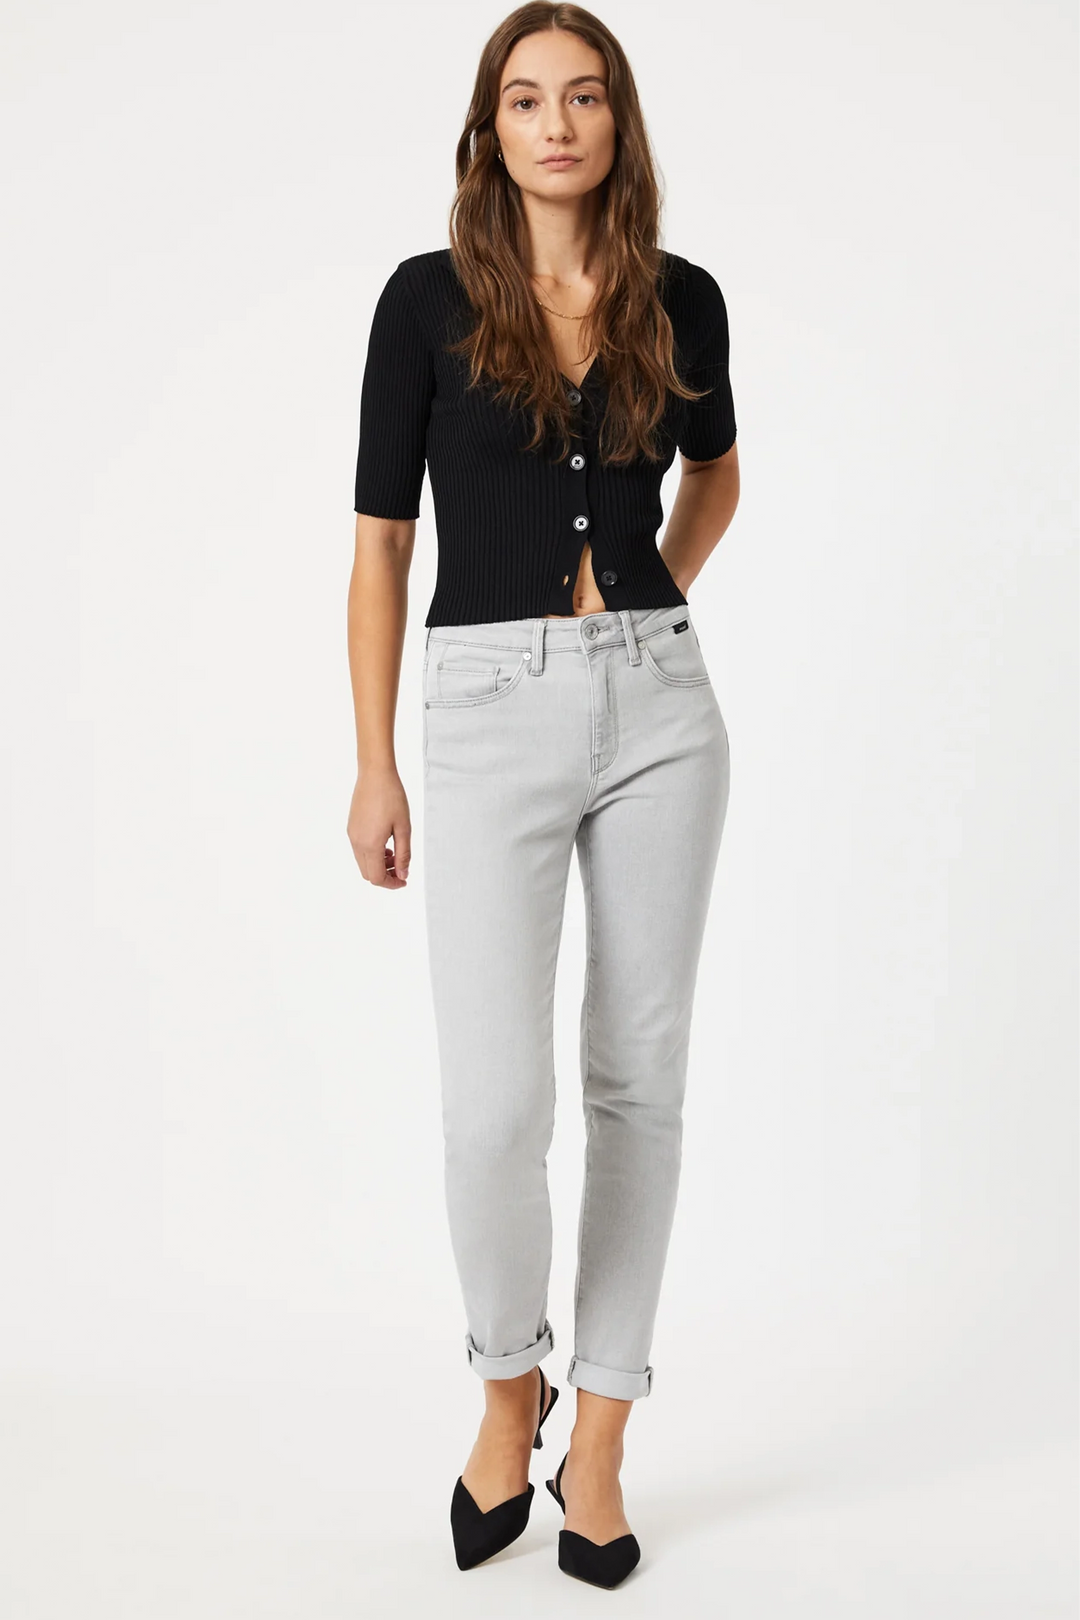 Buy Club A9 Womens Regular Fit Solid Cotton Capri Pants for Daily